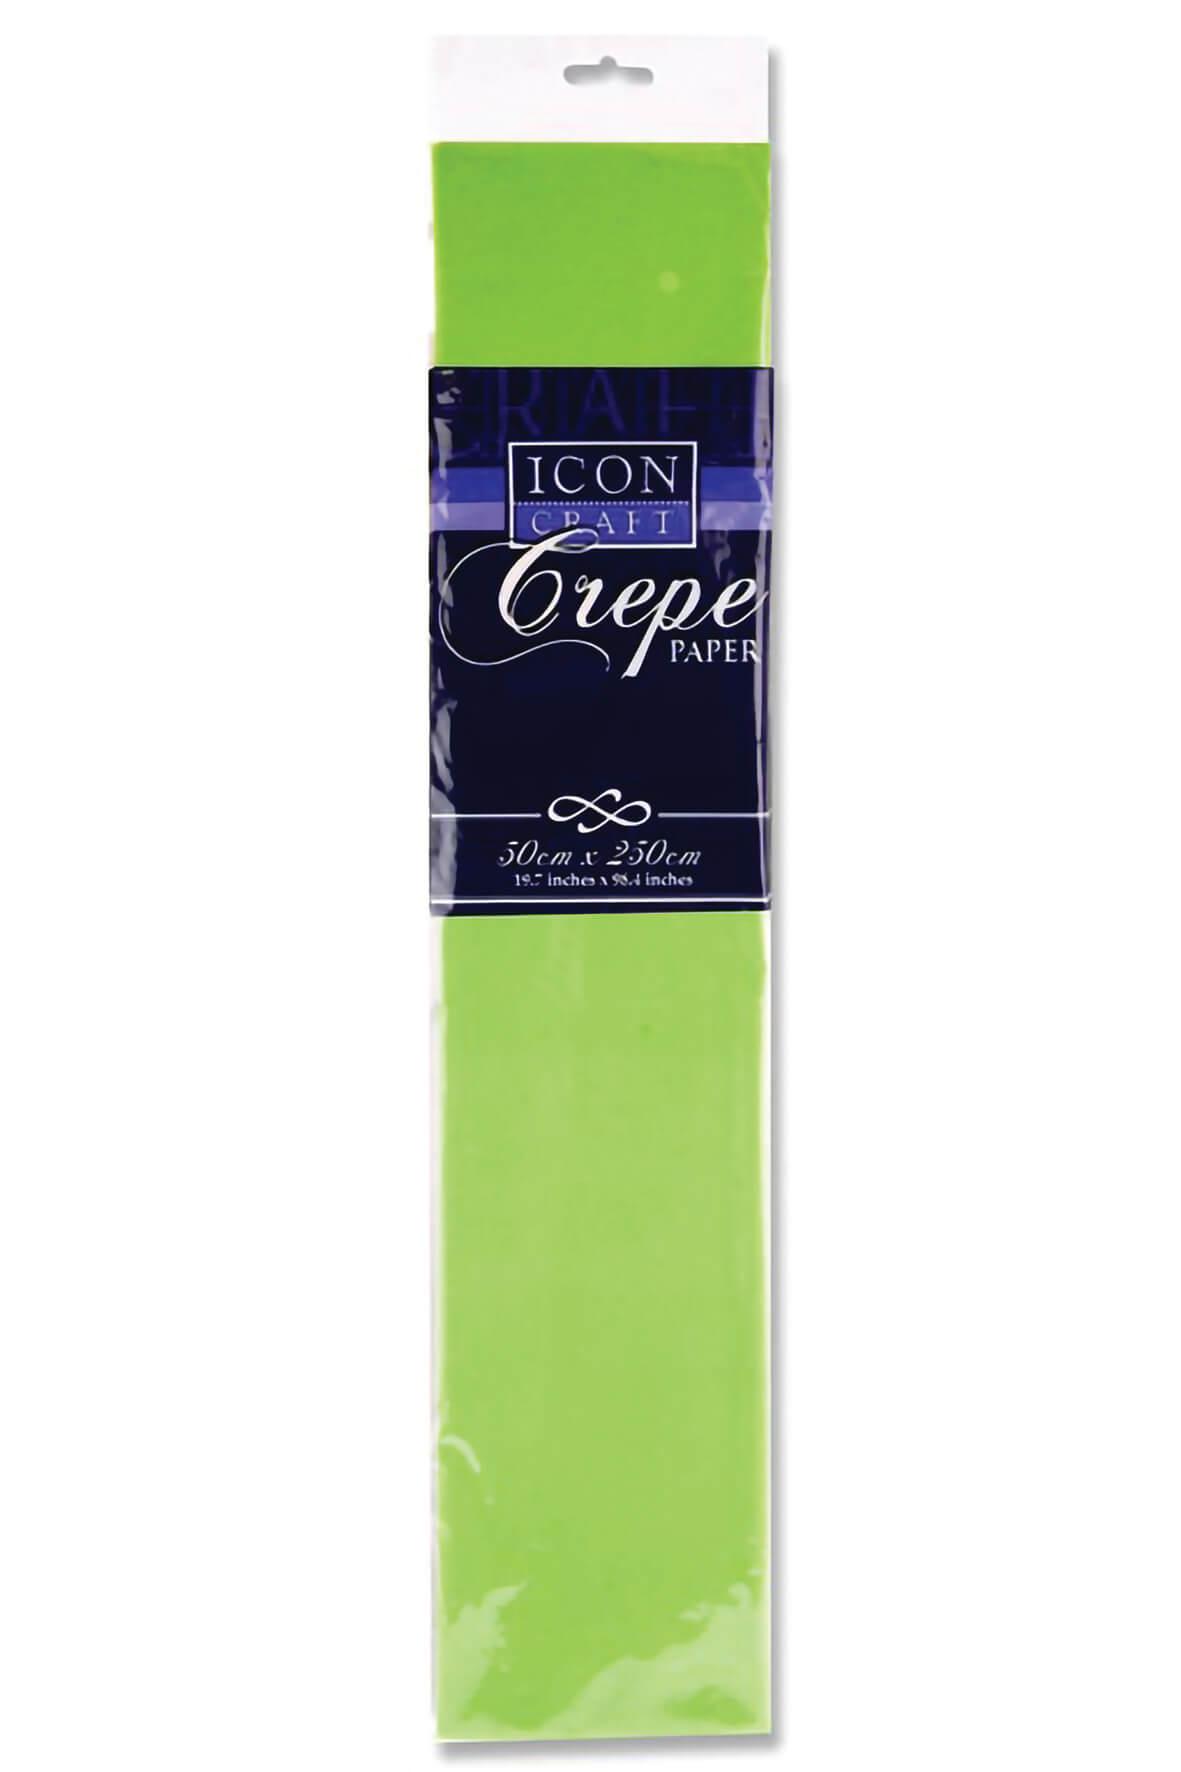 Crepe Paper Lime Green 500mm x 2.5m 17gsm